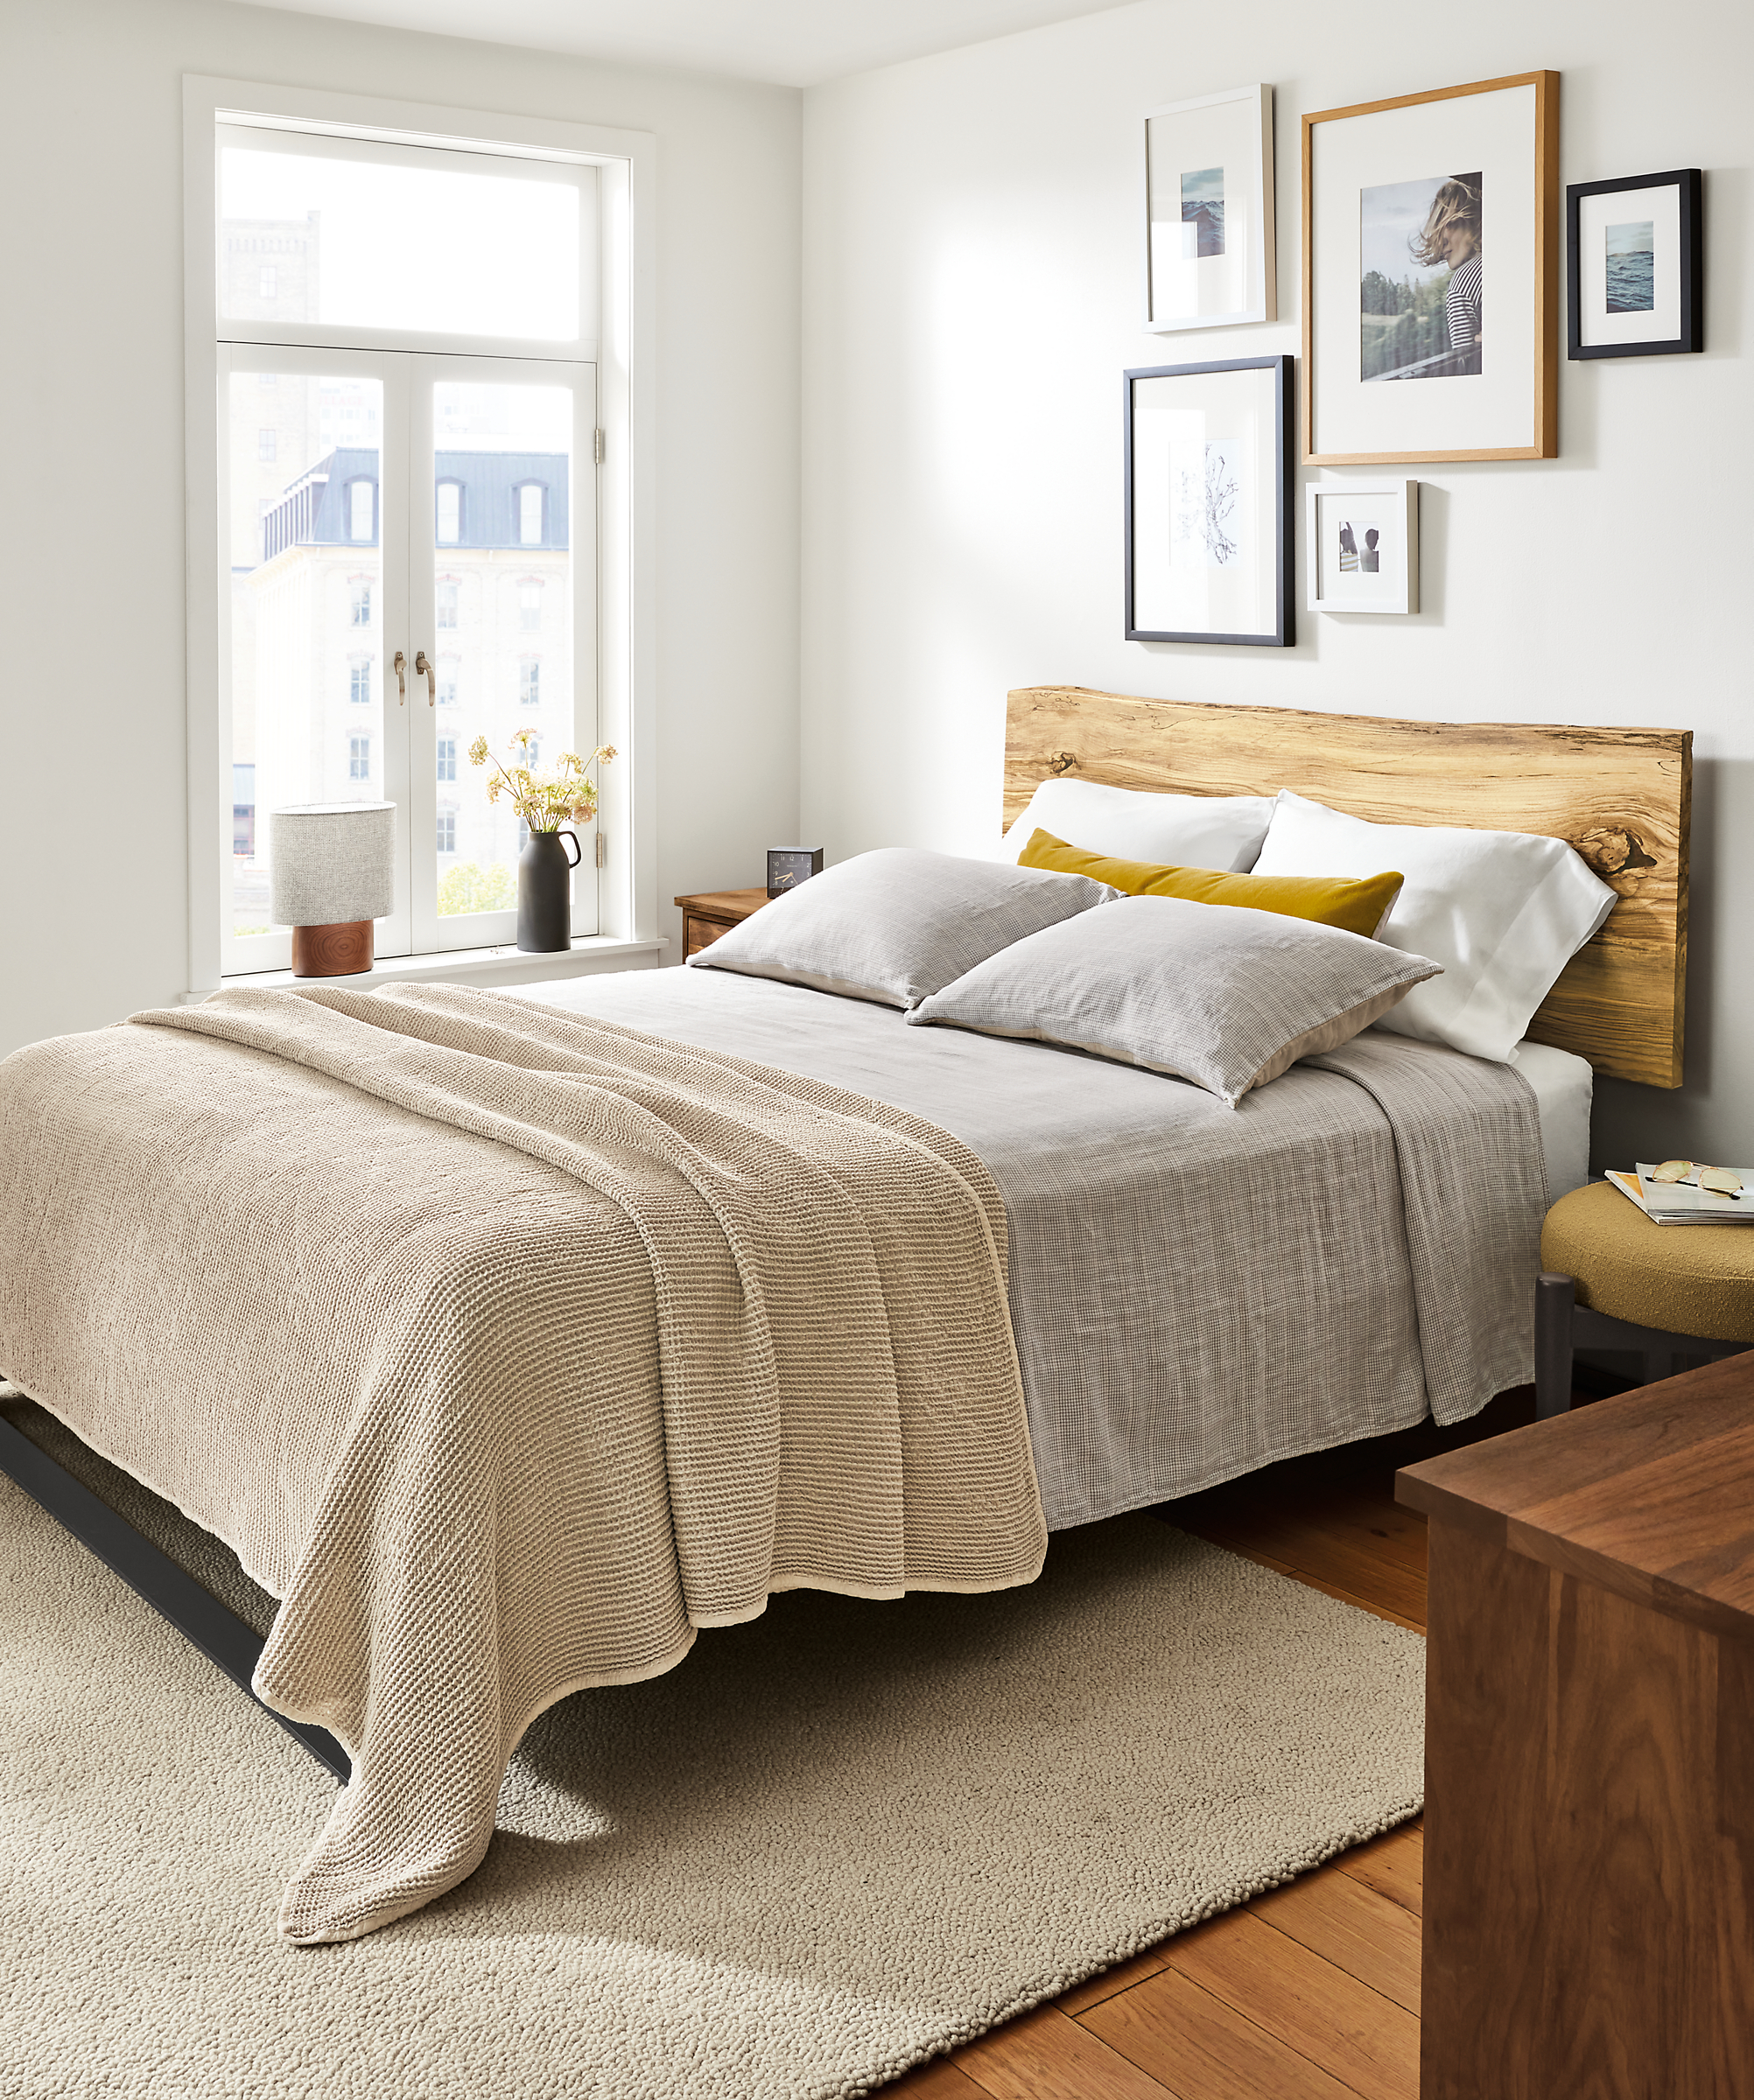 bedroom setting including chilton queen bed, emma coverlet, loren coverlet, relaxed linen bedding.